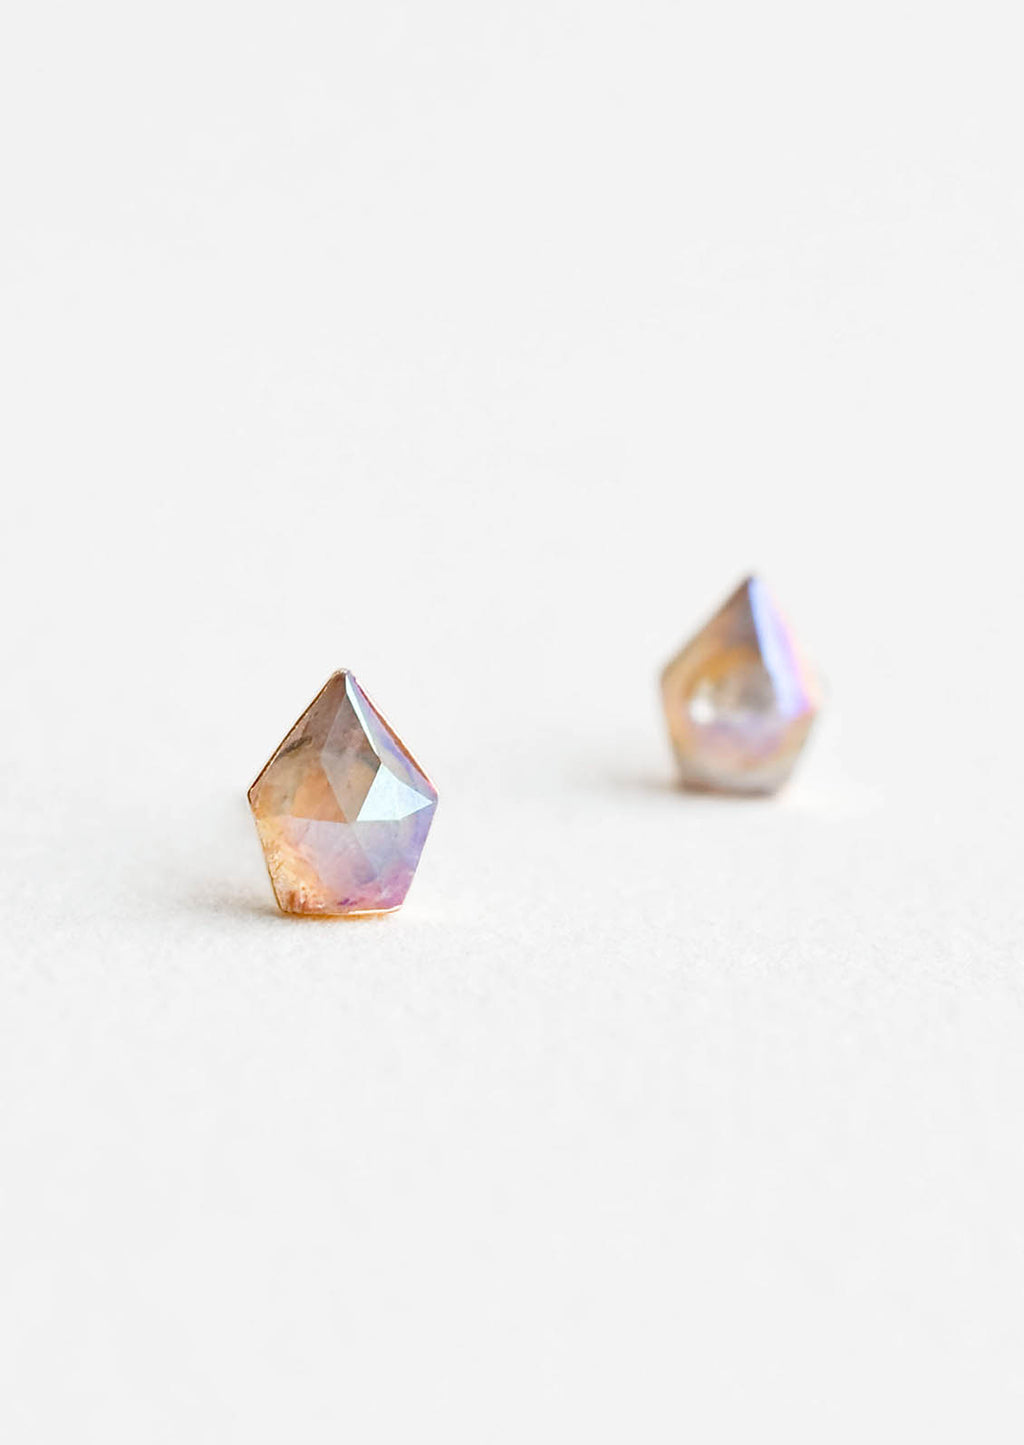 1: Faceted, gemstone shaped earrings with rainbow-like iridescent finish.